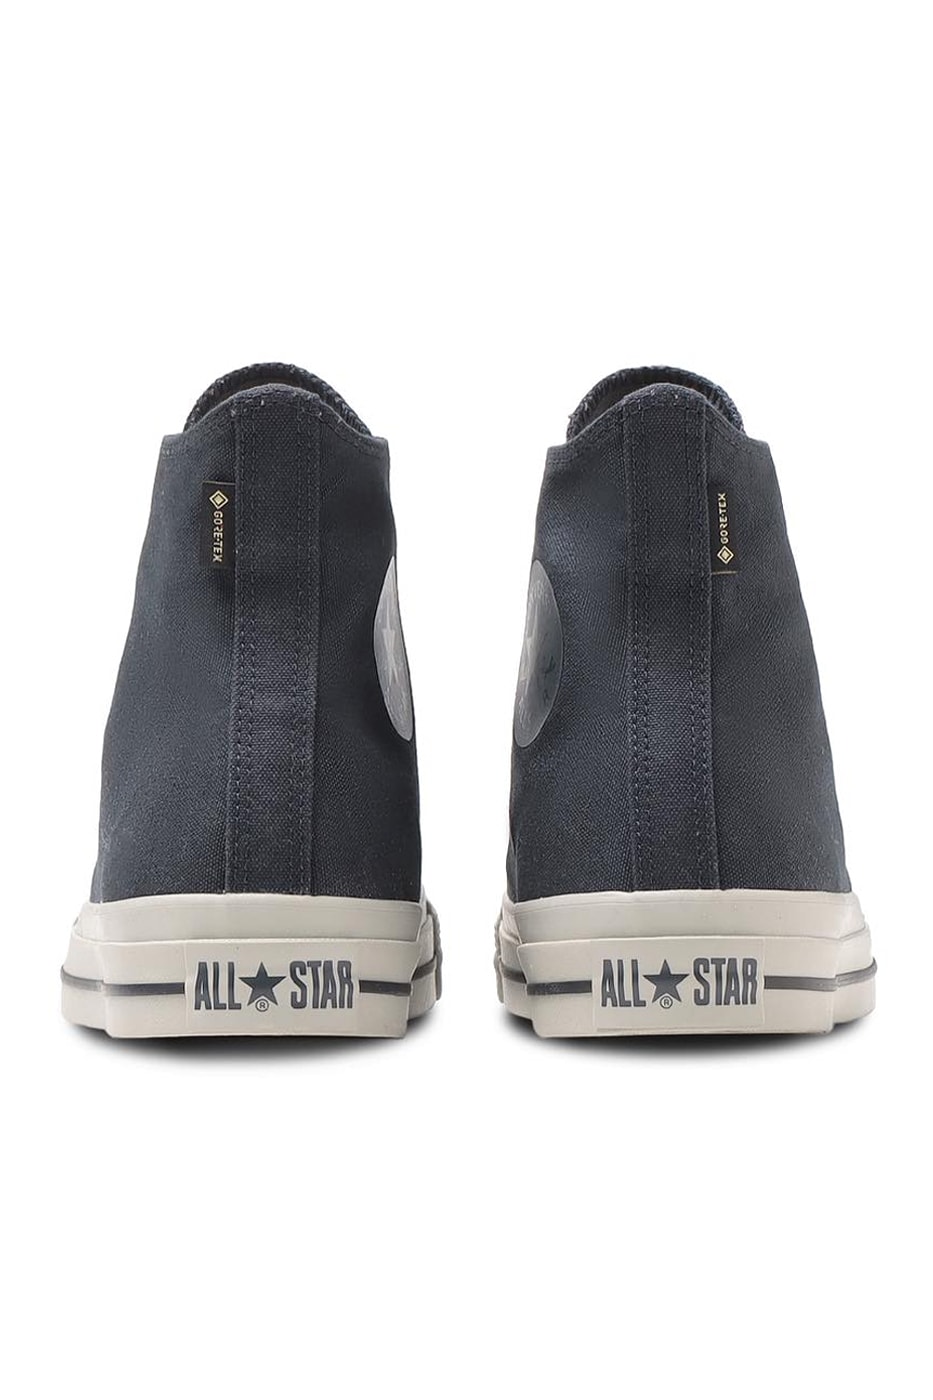 nanamica converse all star gore tex 115 birthday 2023 spring summer collection collaboration  release info date price dark navy gray 